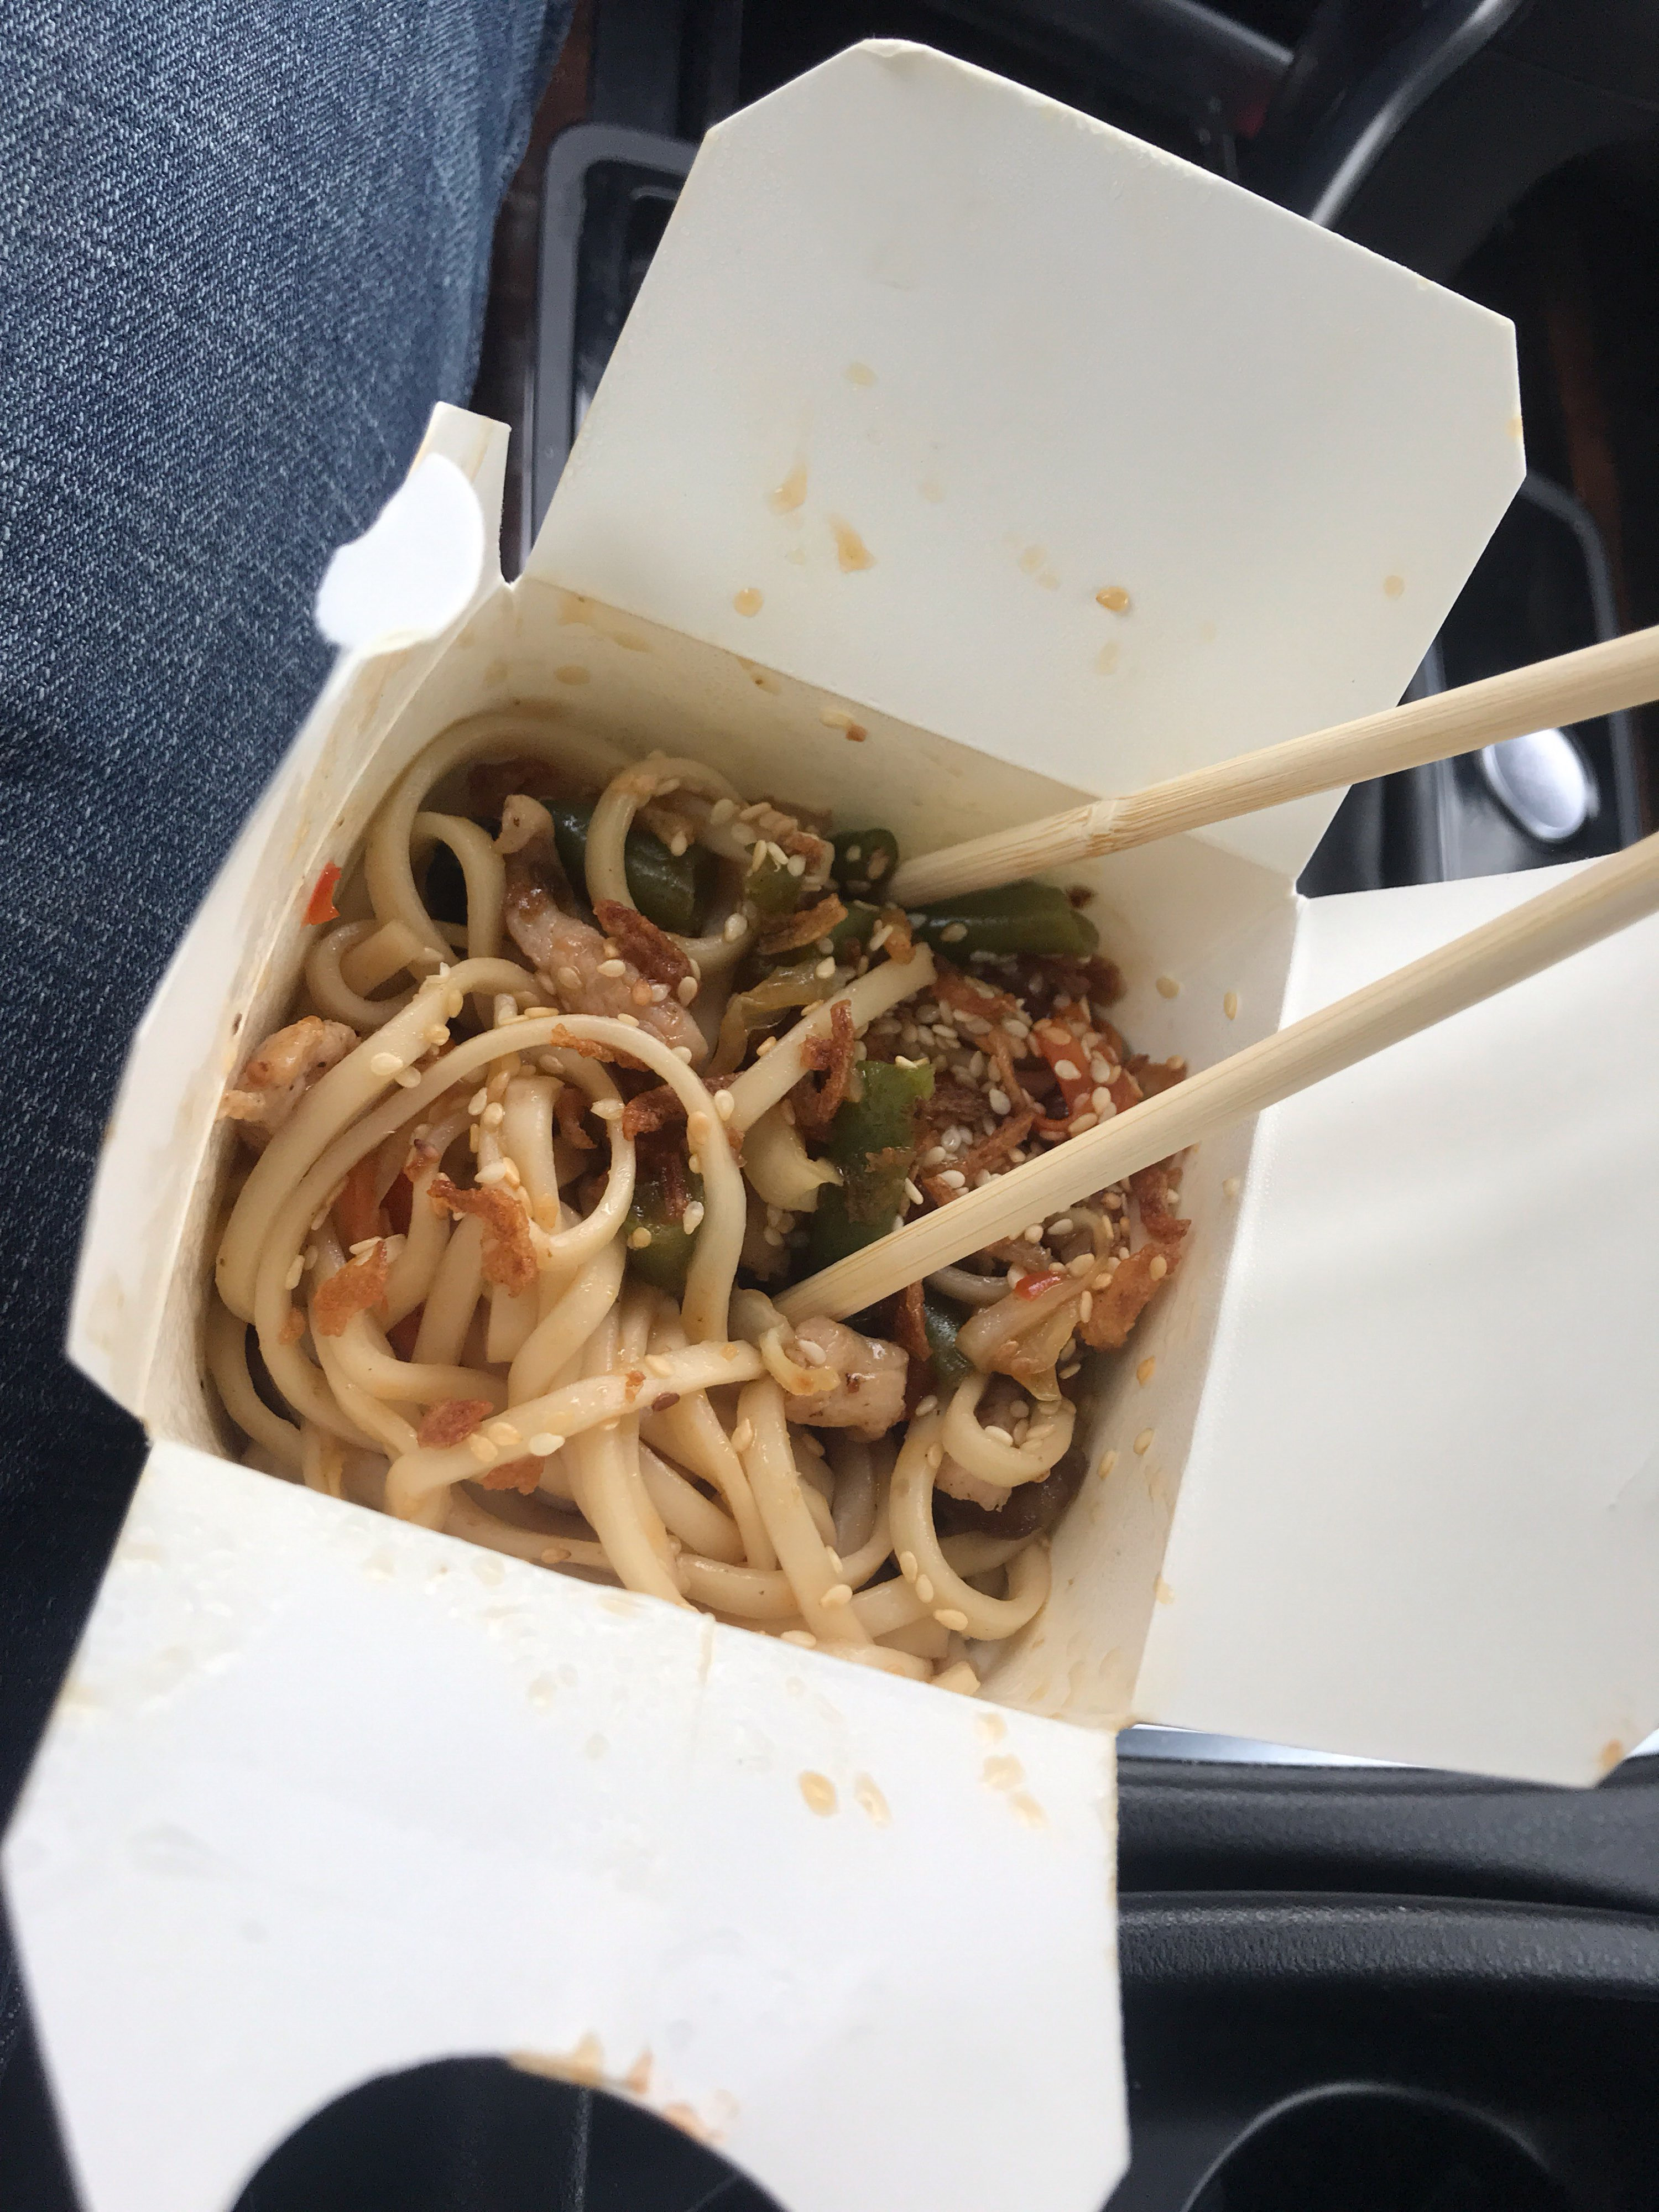 Hot wok titusville - 🧡 Byba: Delivery Chinese Food Titusville.